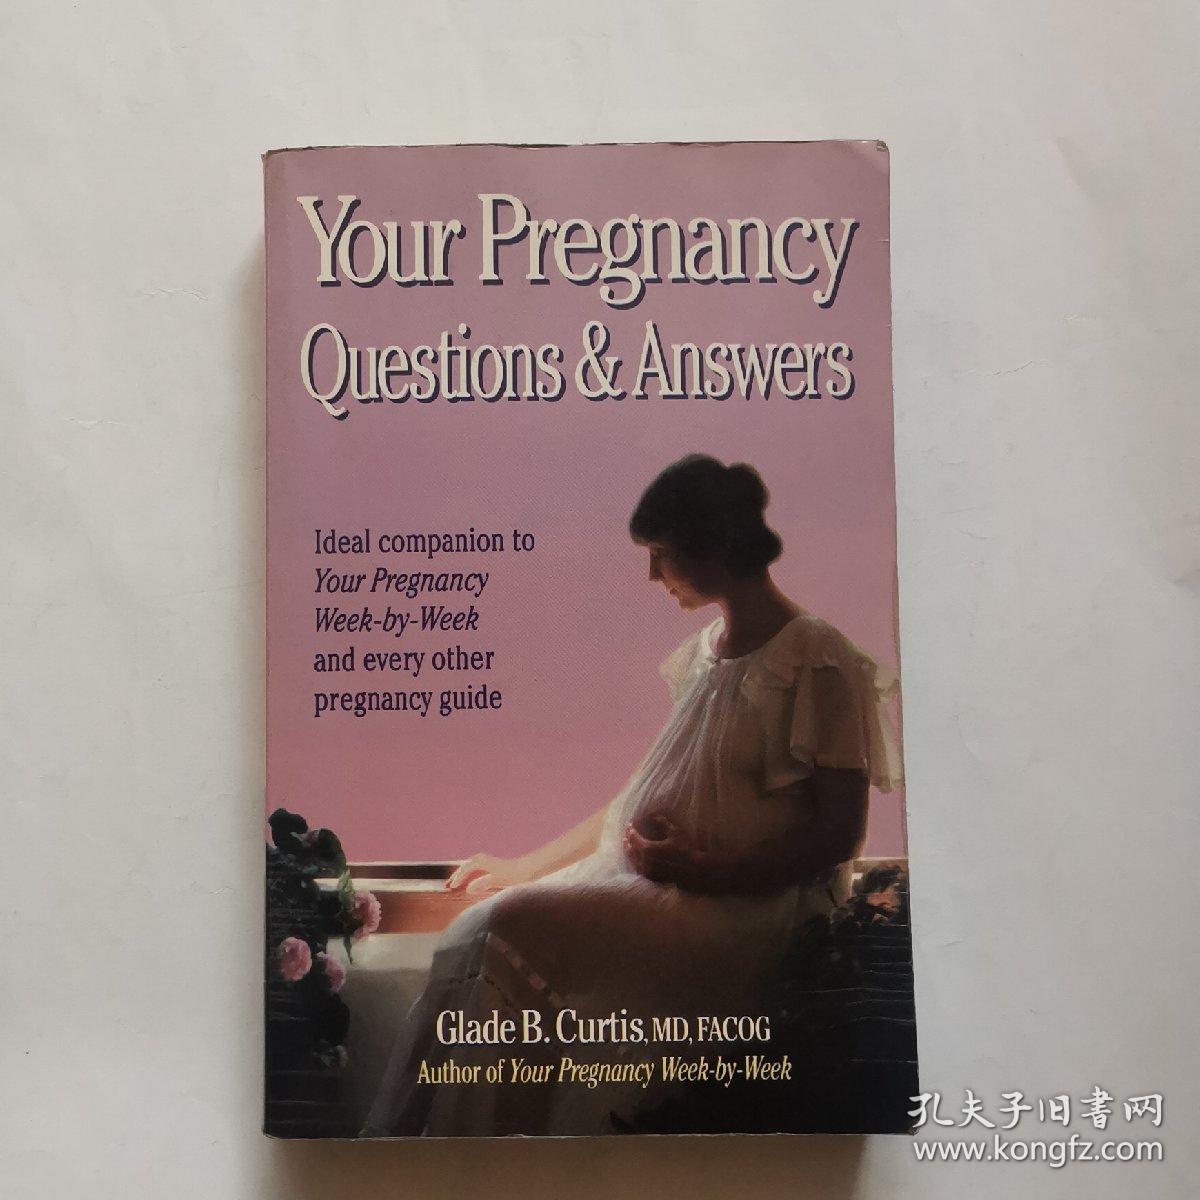 Your Pregnancy Questions&Answers